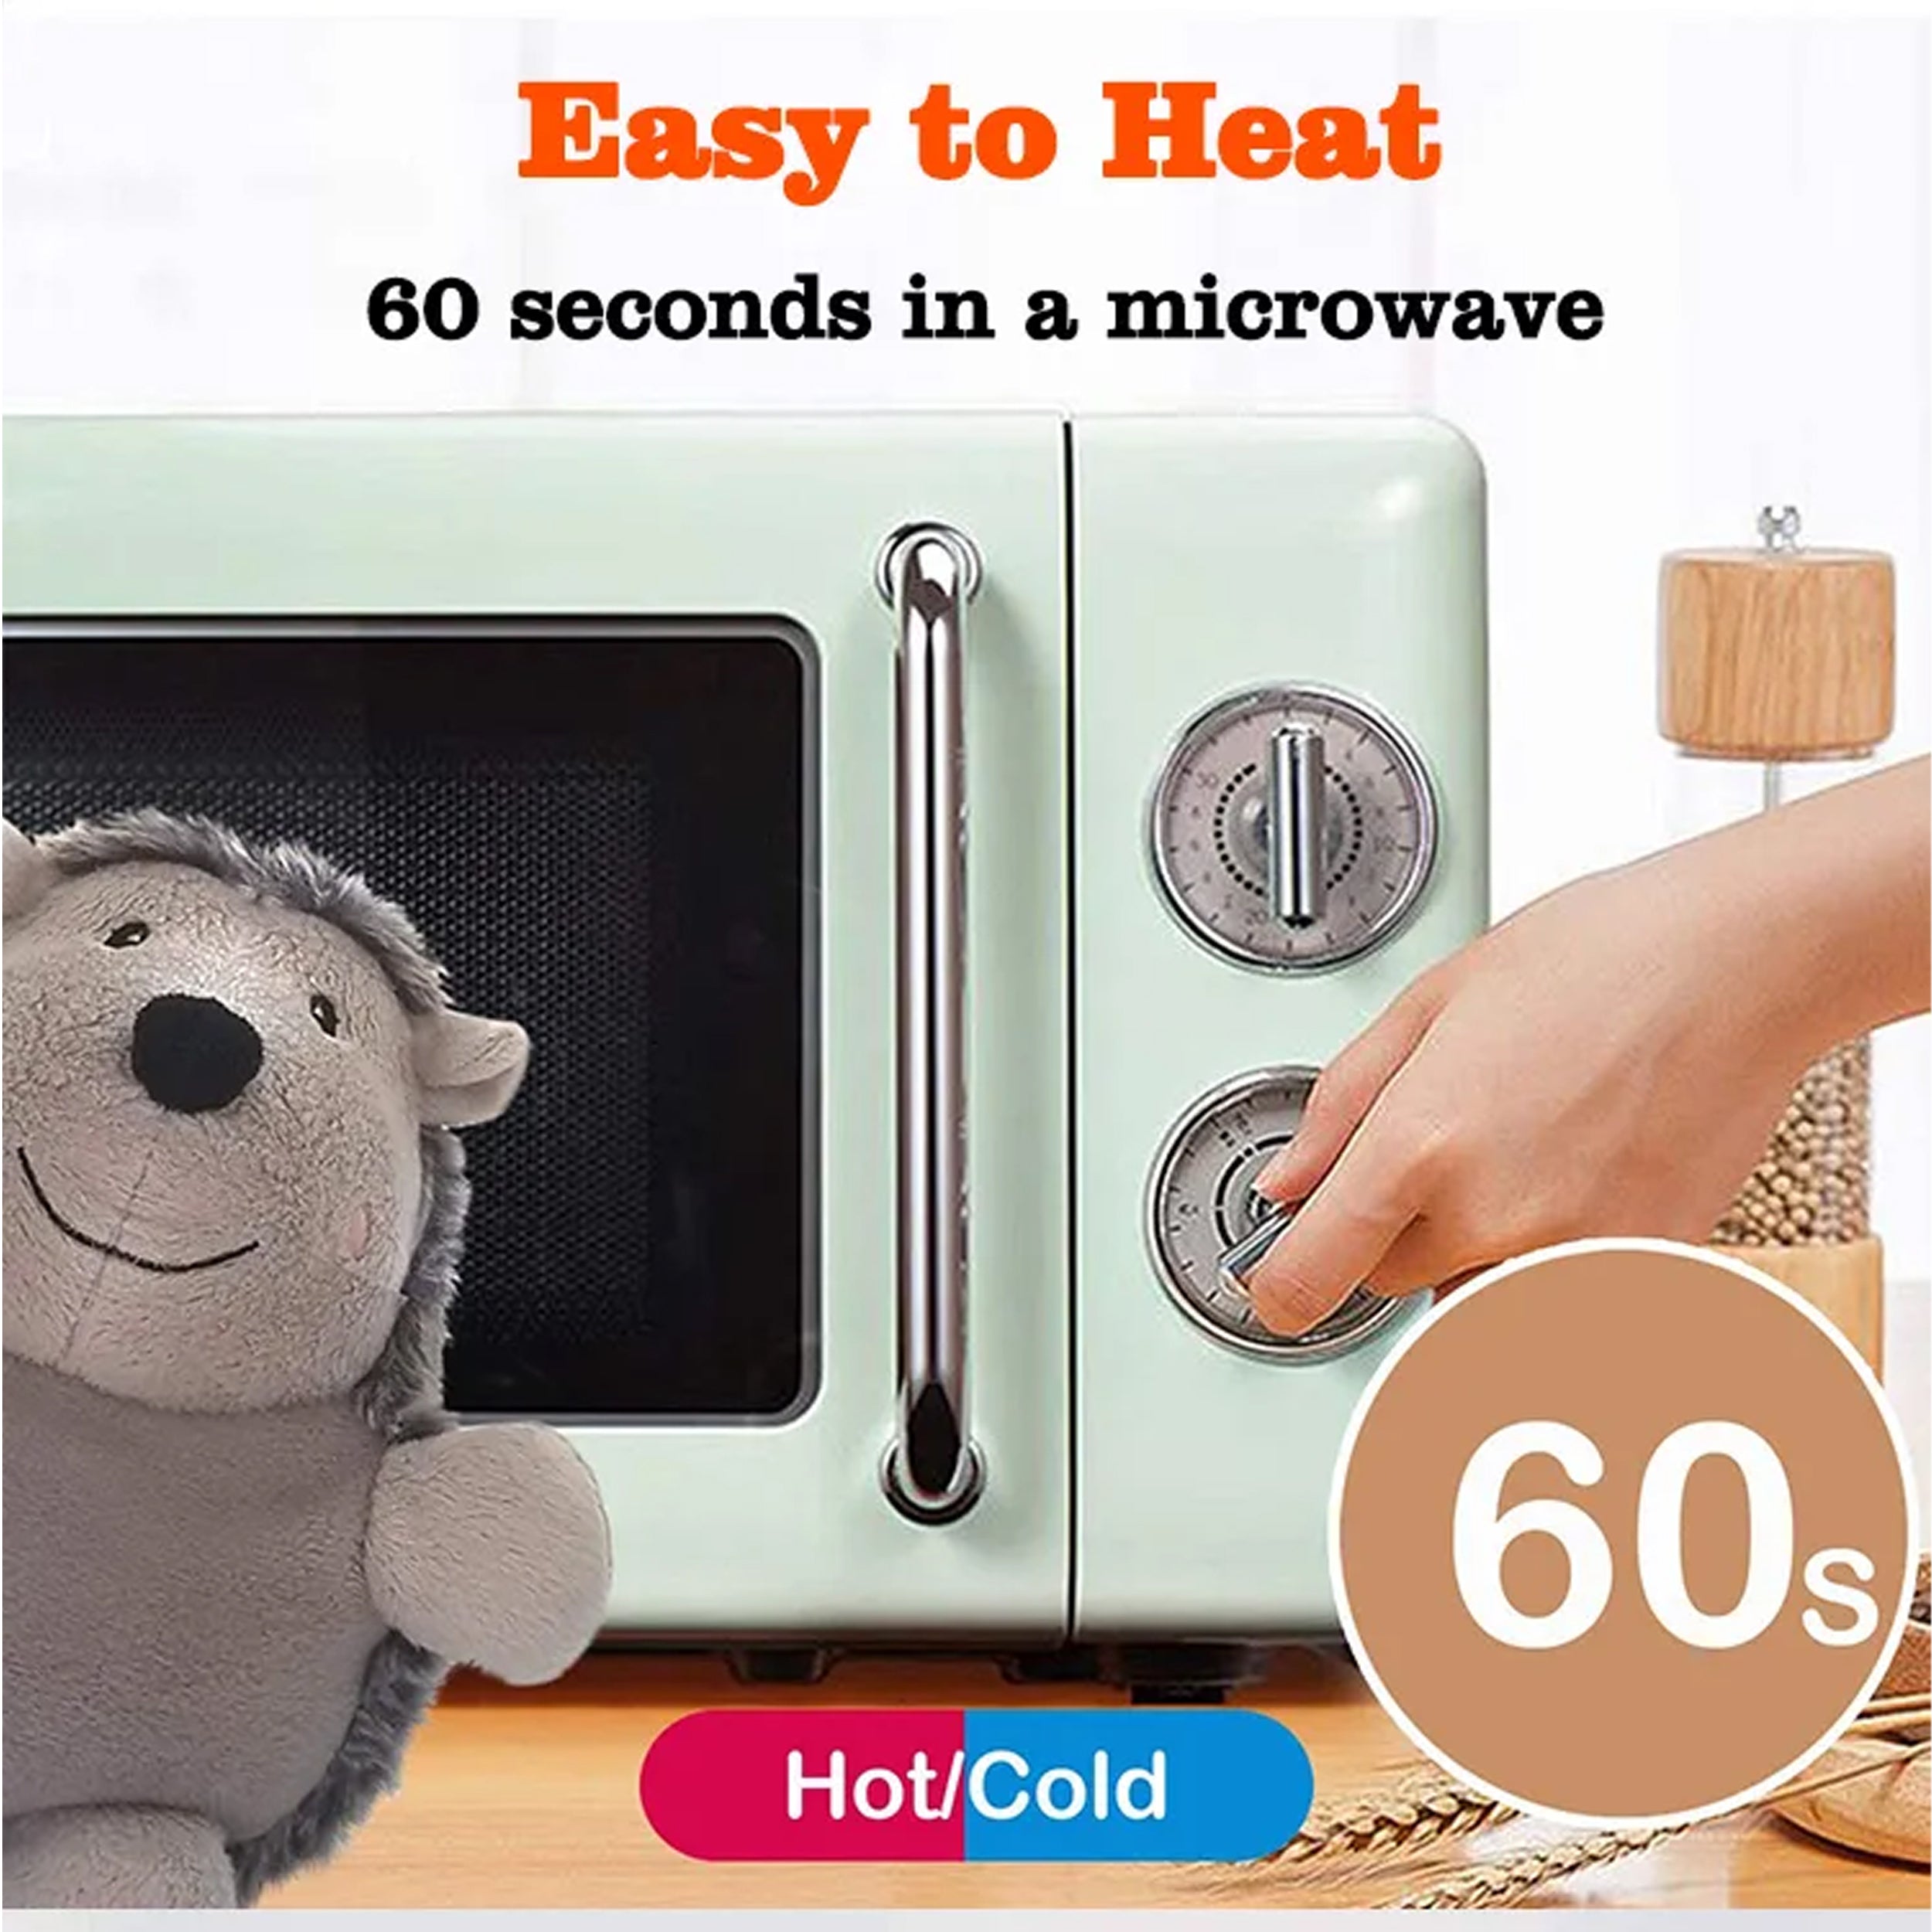 Keep Warm and Cozy with JSBlueRidge's Plush Toy Microwave Wheat Bag Heat Pack Warmer